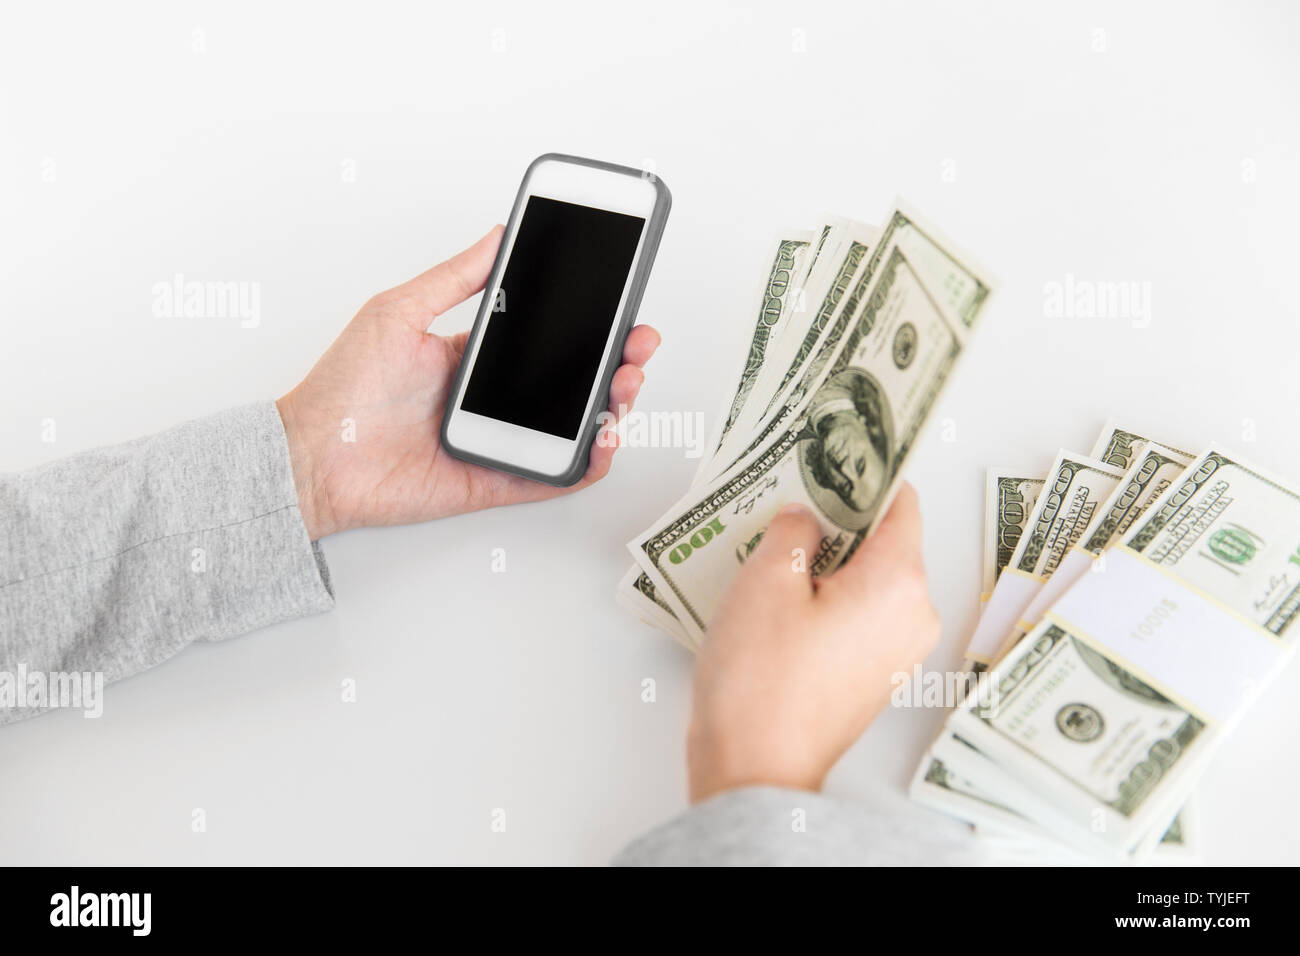 close up of hands with smartphone and dollar money Stock Photo